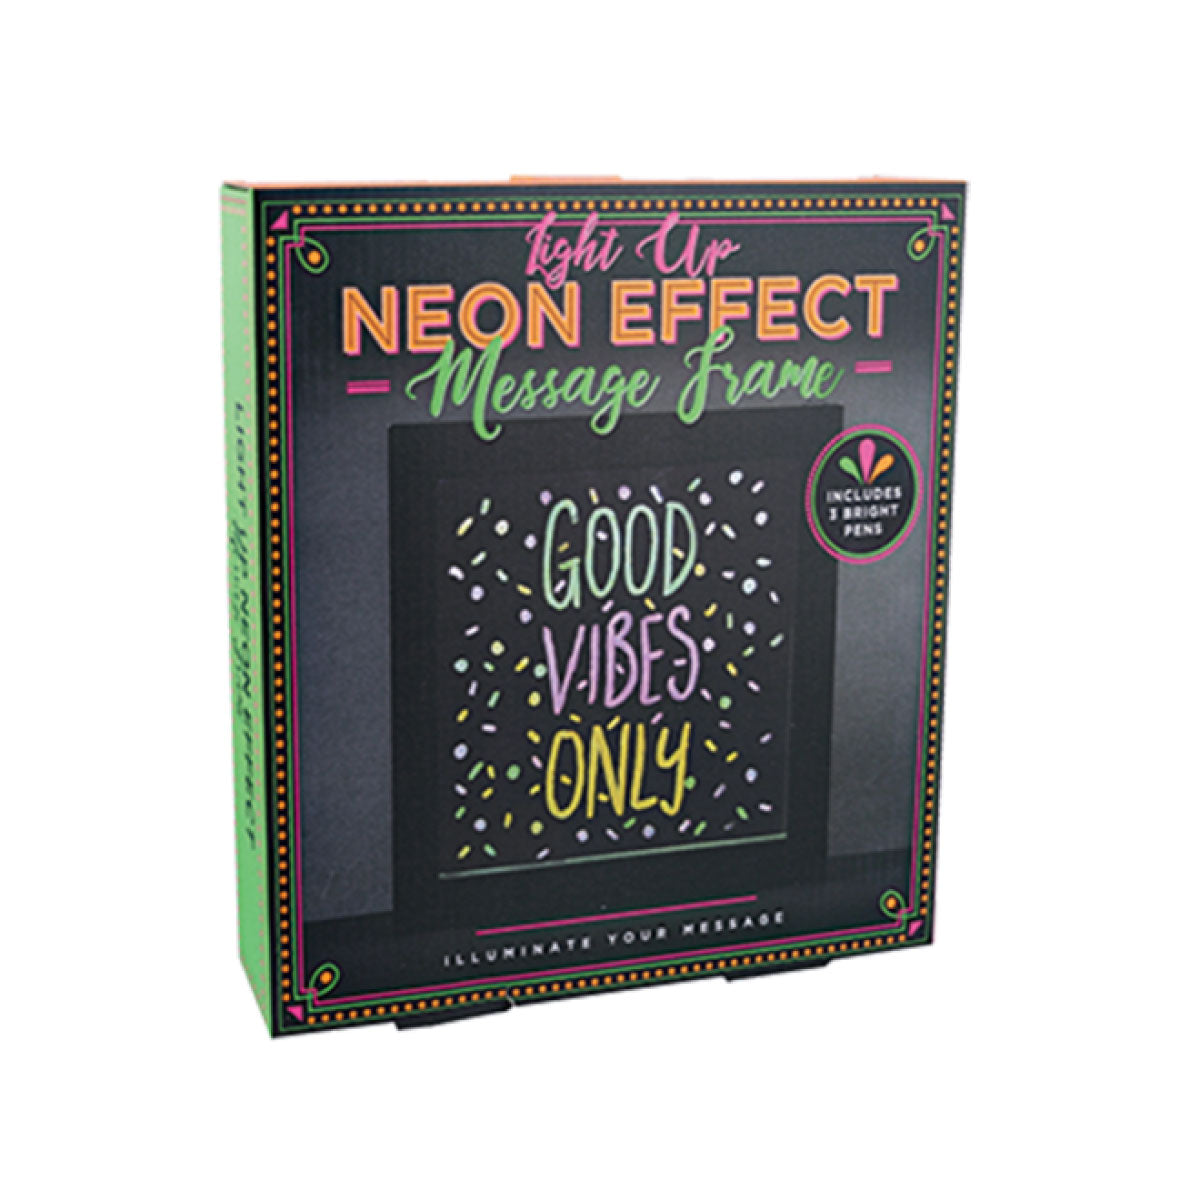 Light Up Neon Effect Message Frame from iScream